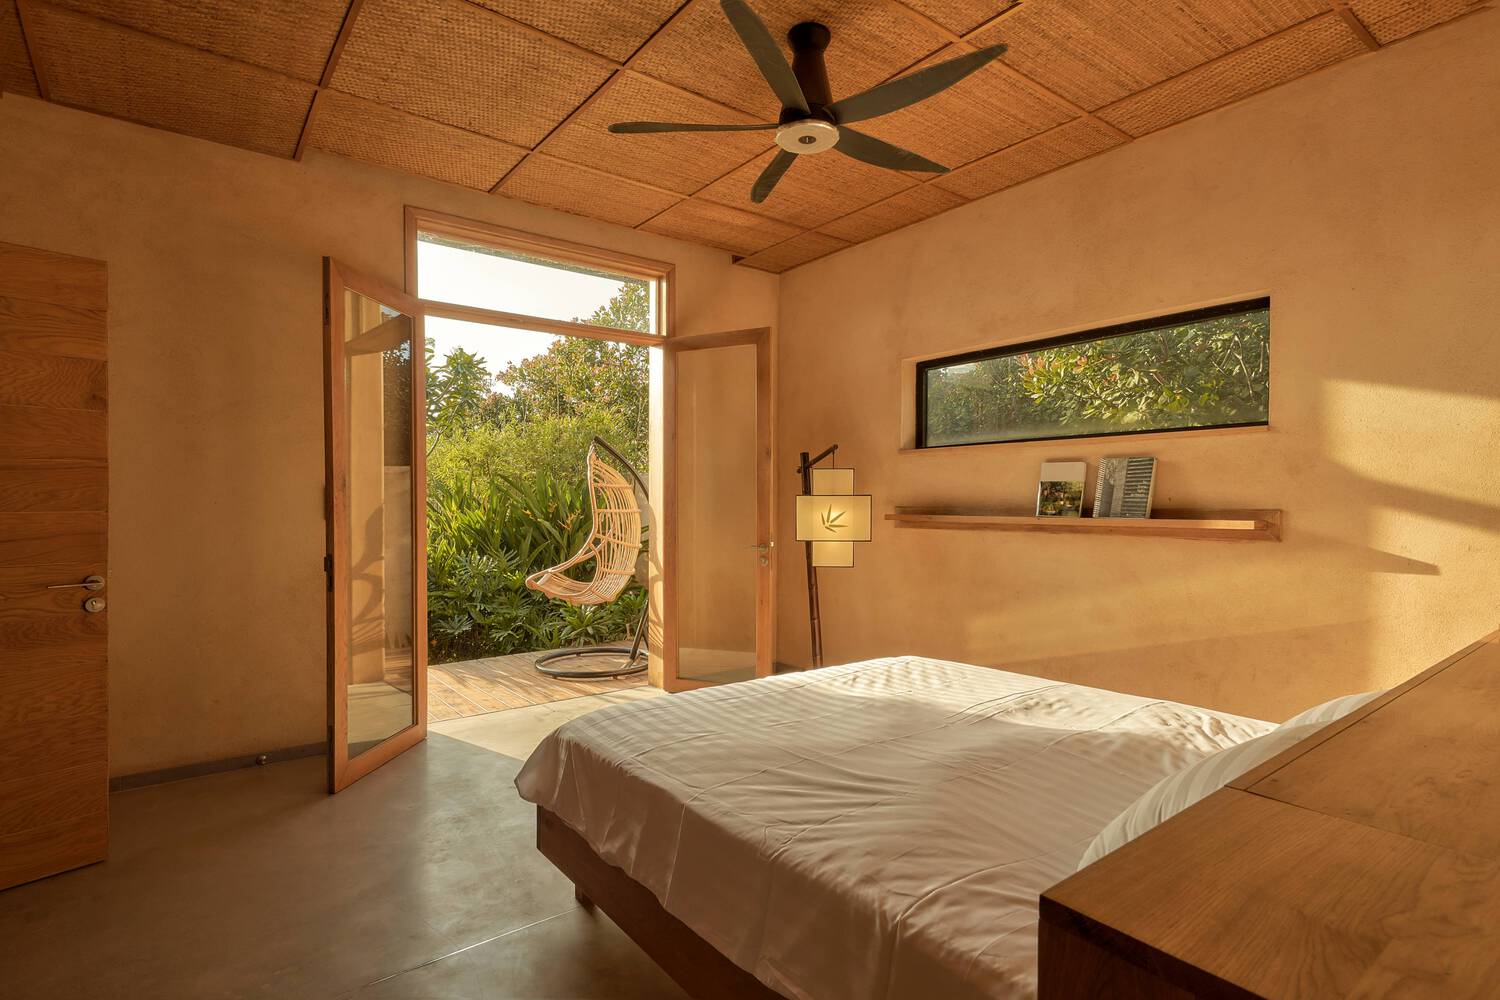 Bedroom with lanai.